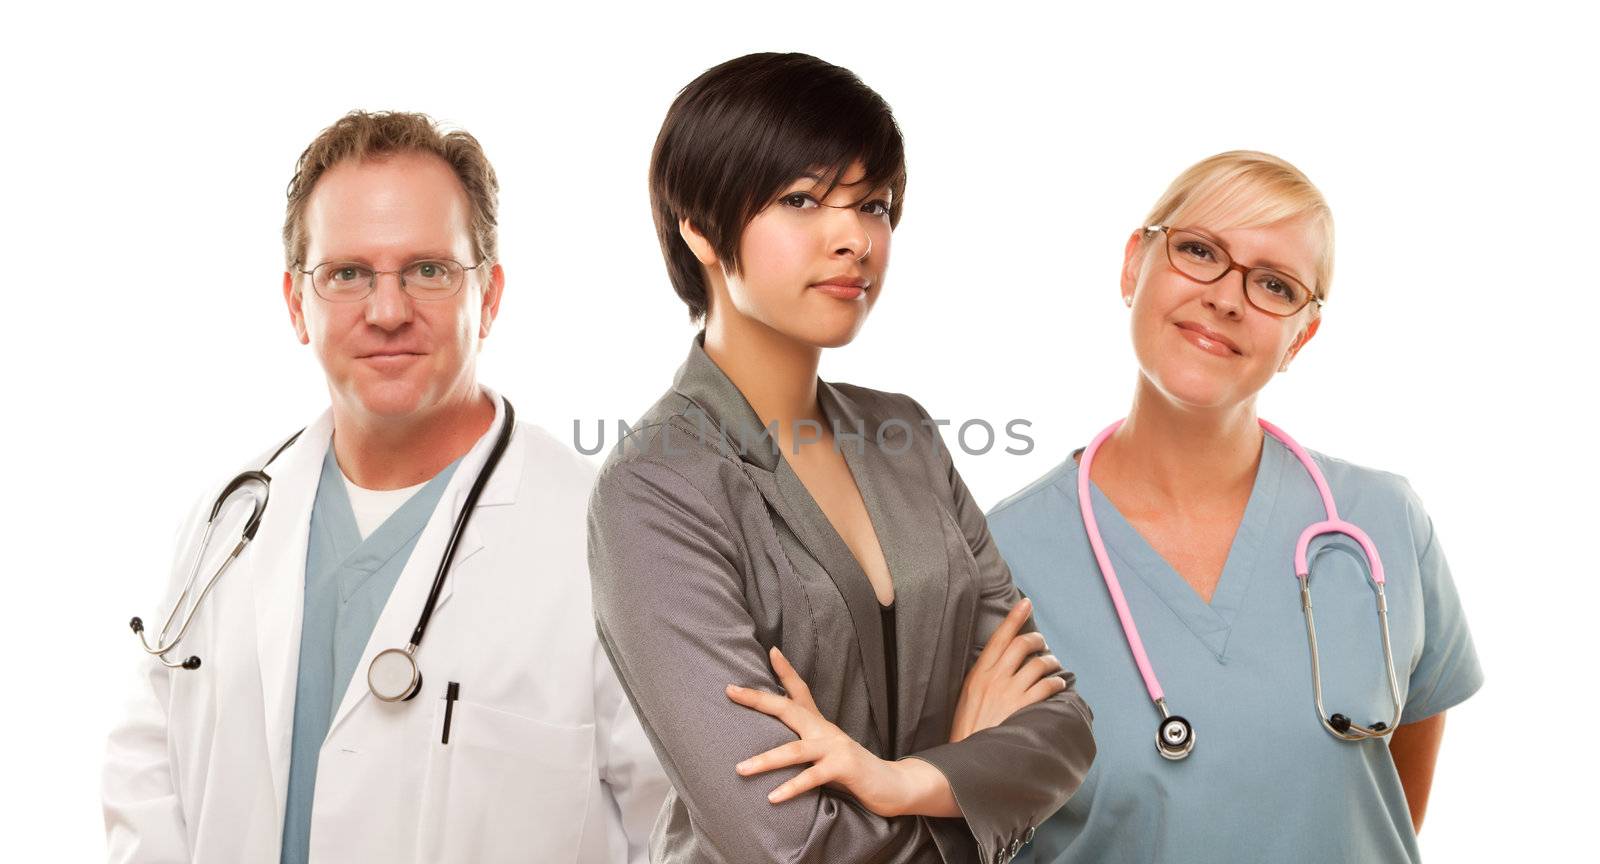 Young Mixed Race Woman with Doctors and Nurses Behind Isolated on a White Background.